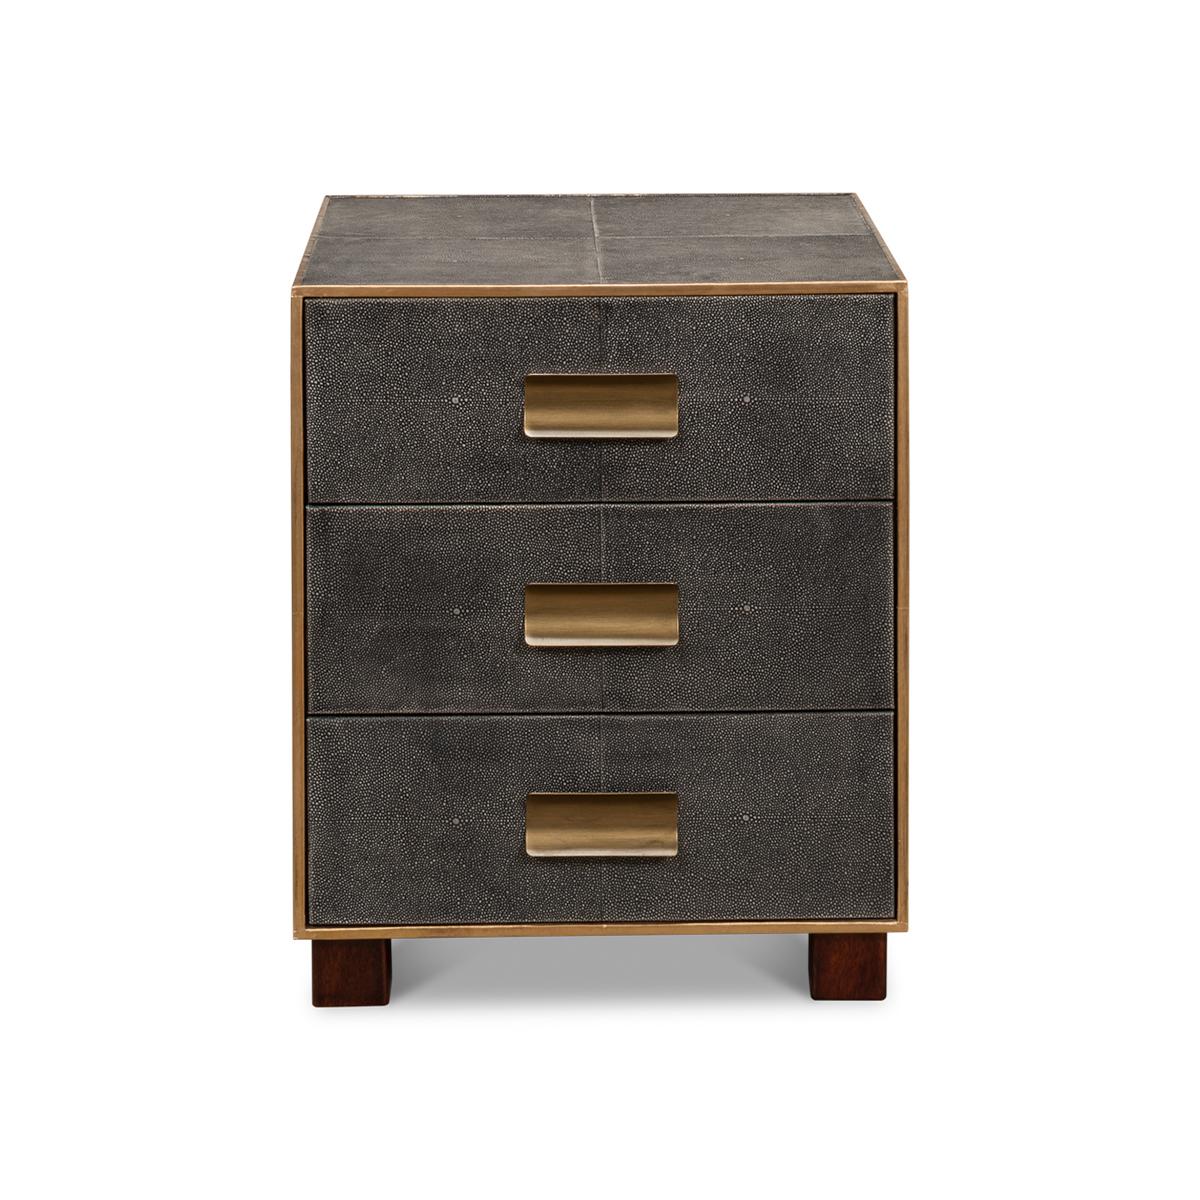 Wrapped in a faux shagreen leather in an antiqued gray leather. With gold highlights and trim, three drawers raised on short block feet.

Dimensions: 20